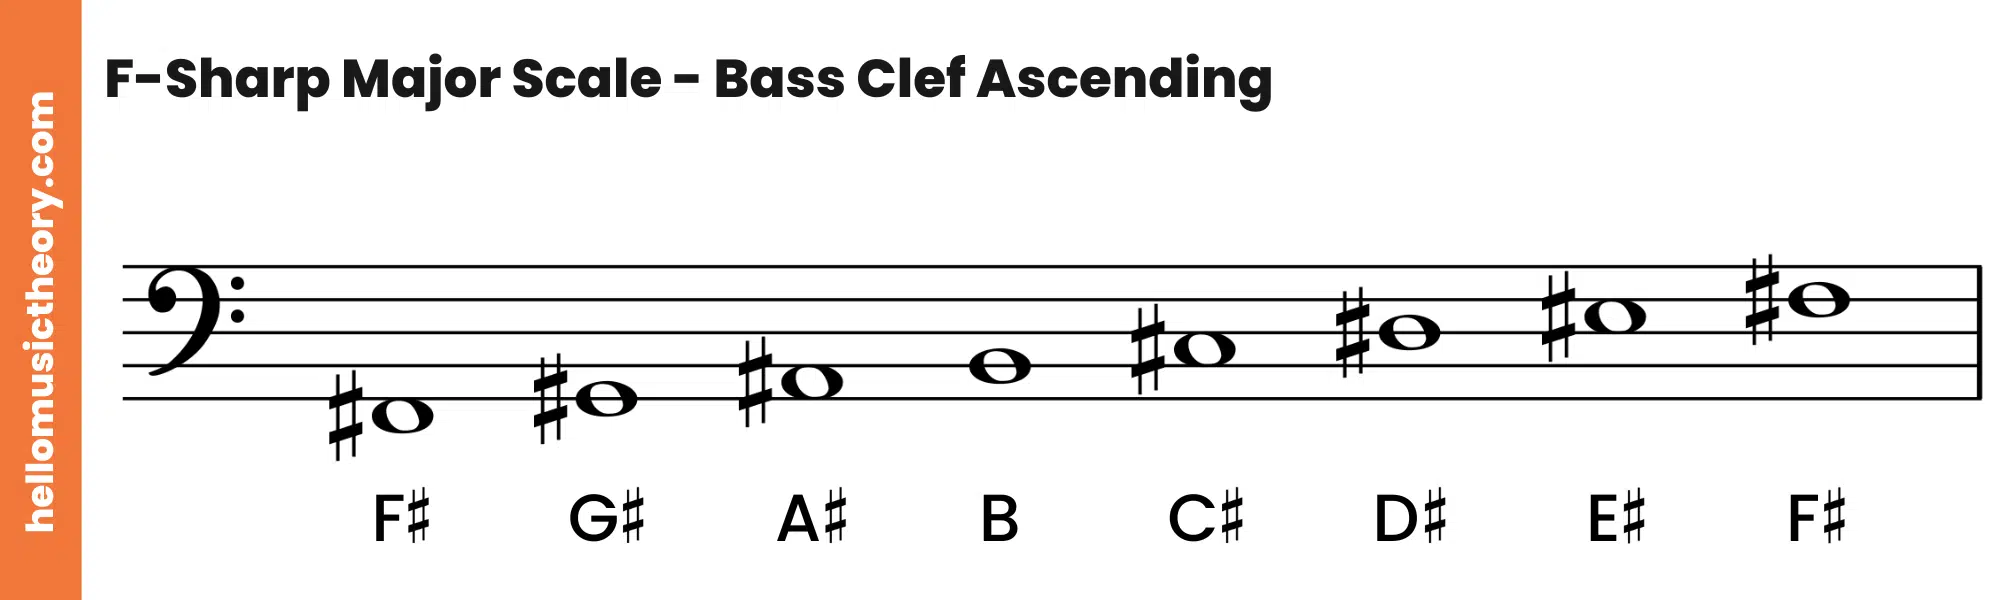 F-Sharp Major Scale Bass Clef Ascending